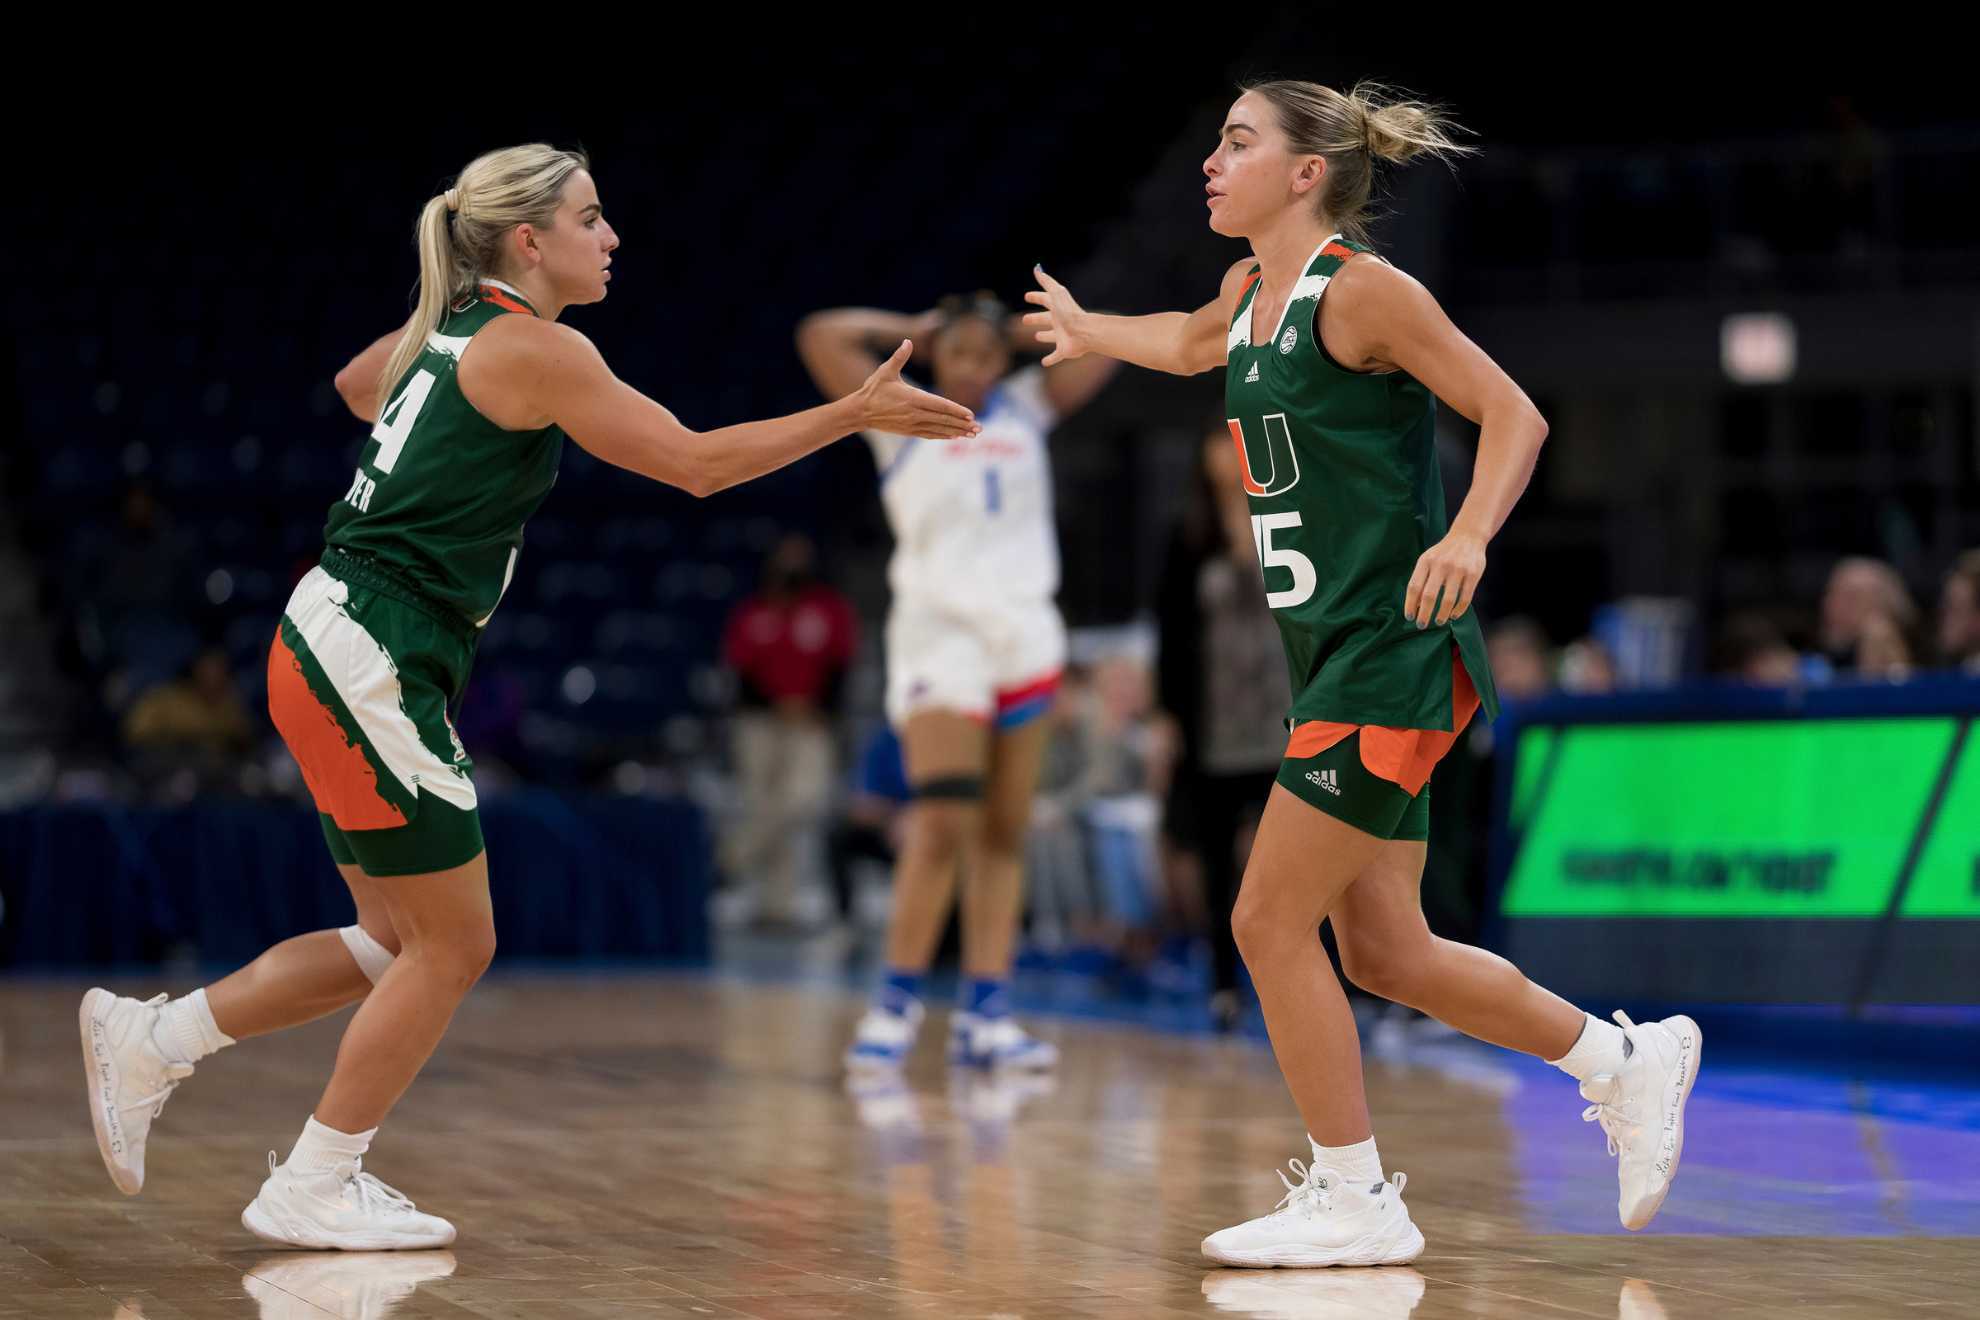 University of Miami's Cavinder twins have lived up to their social media hype. Advance to Sweet 16.